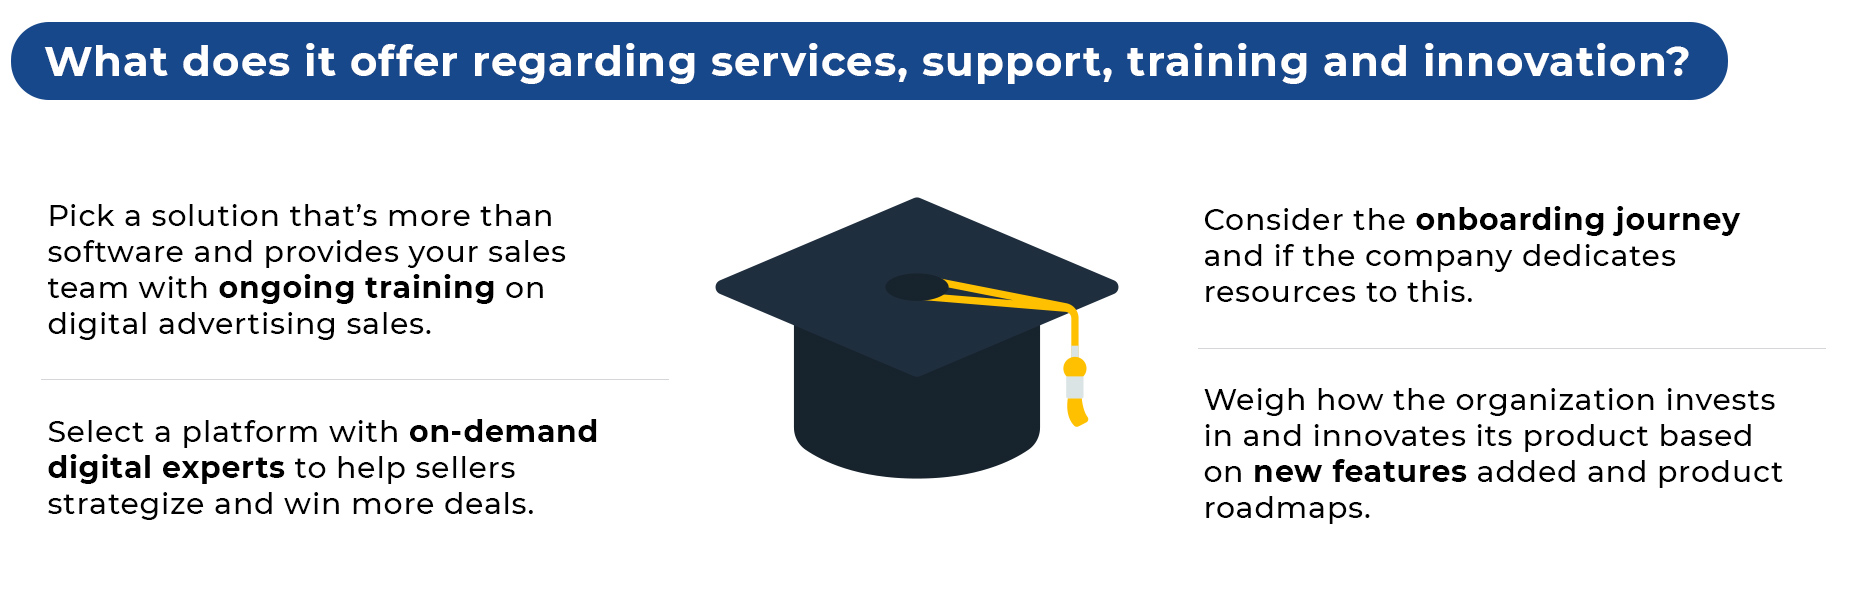 What does it offer regarding services, support, training and innovation?